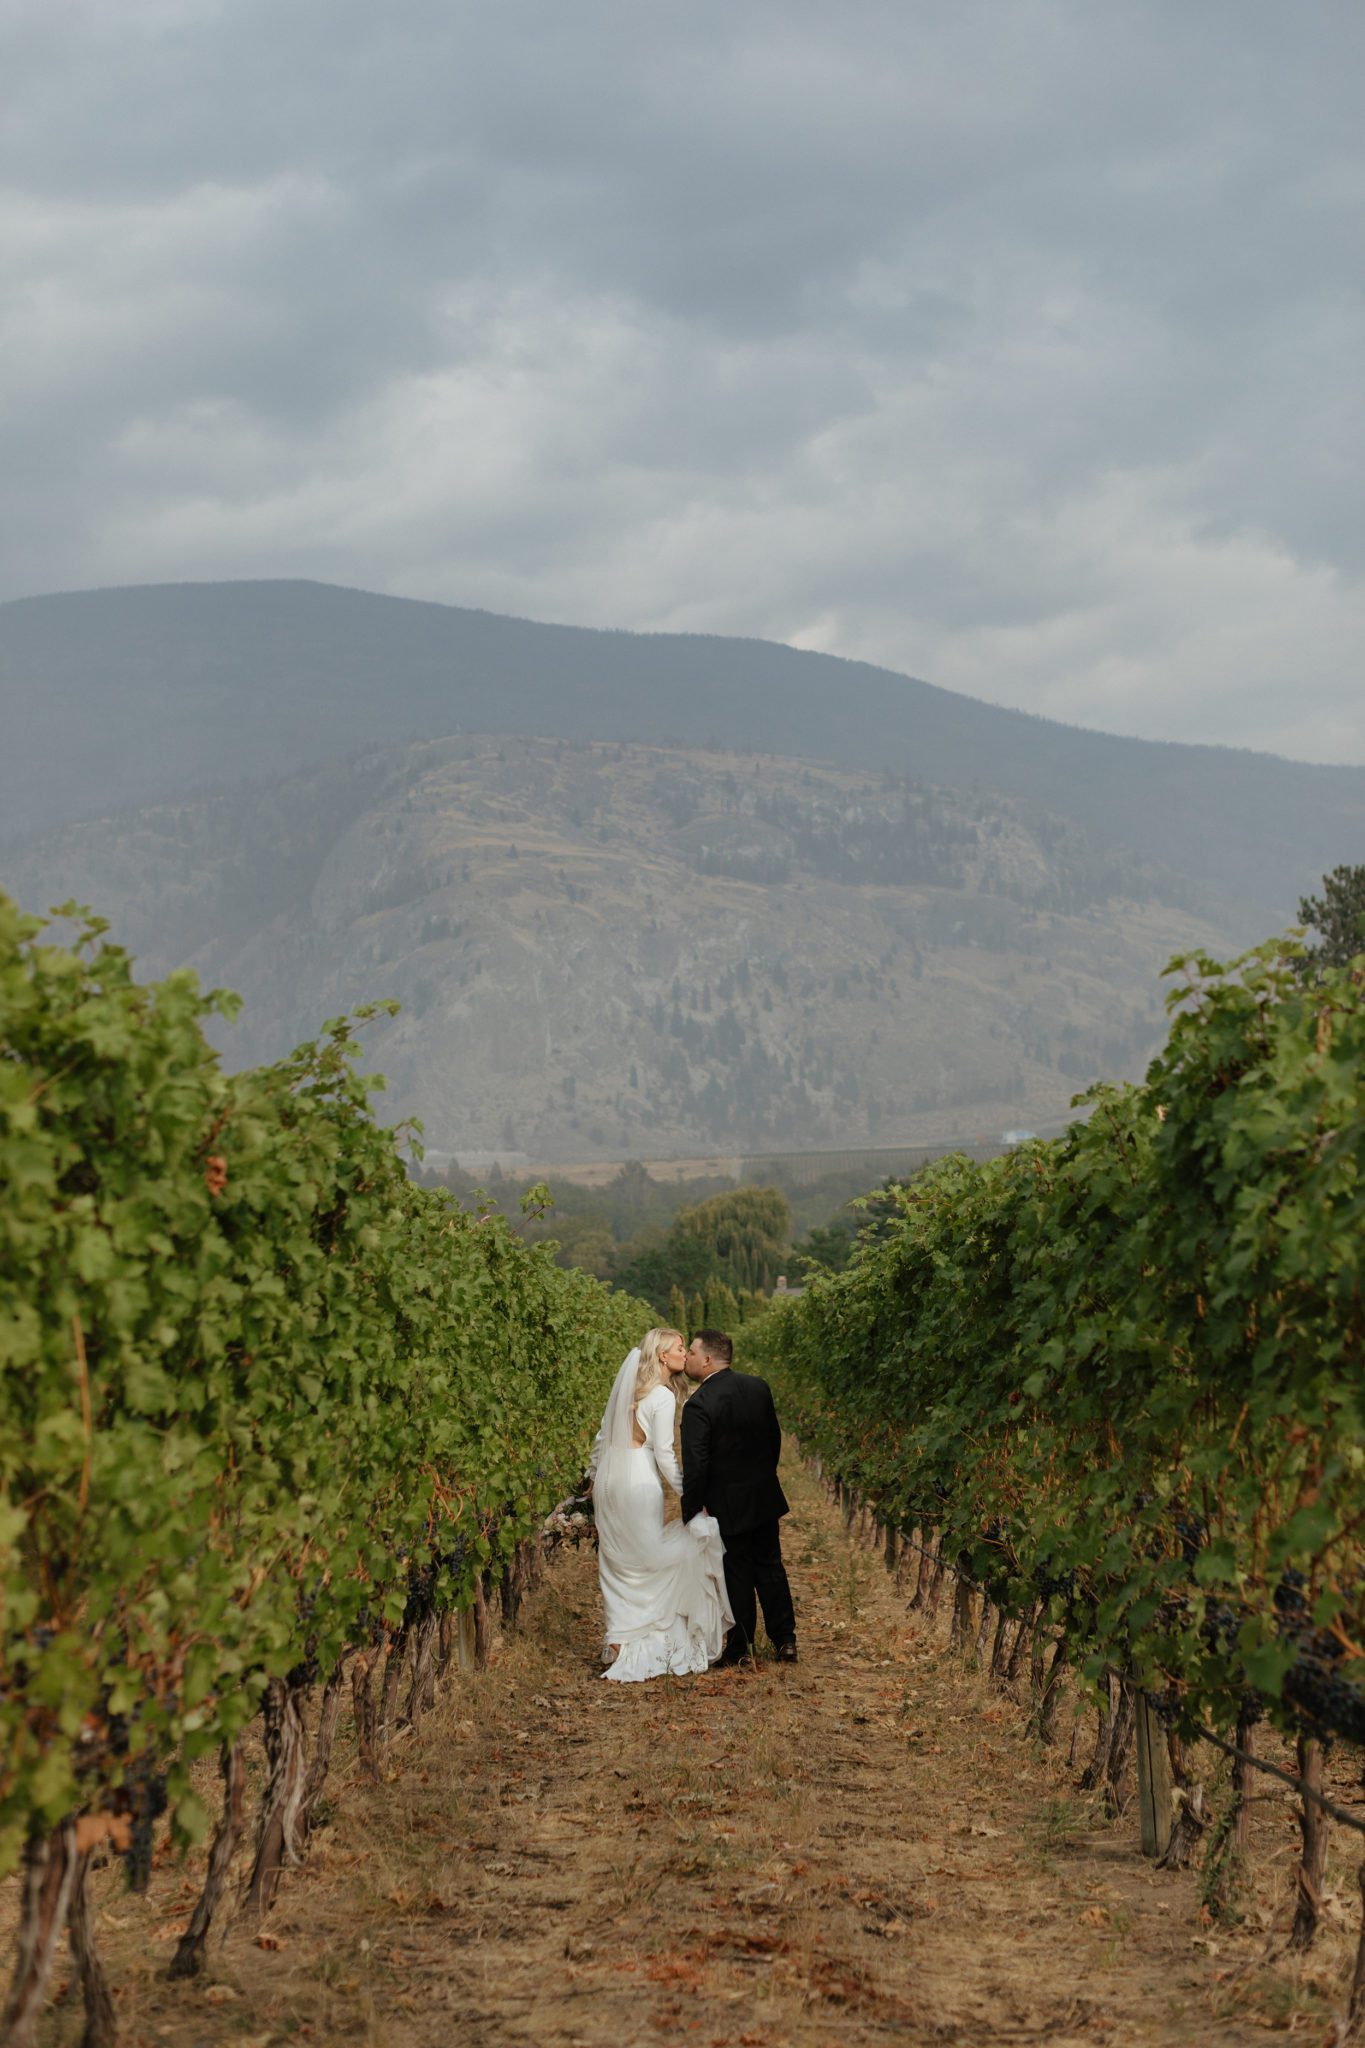 Classic bride and groom wedding attire inspiration from the heart of the Okanagan Valley in wine country